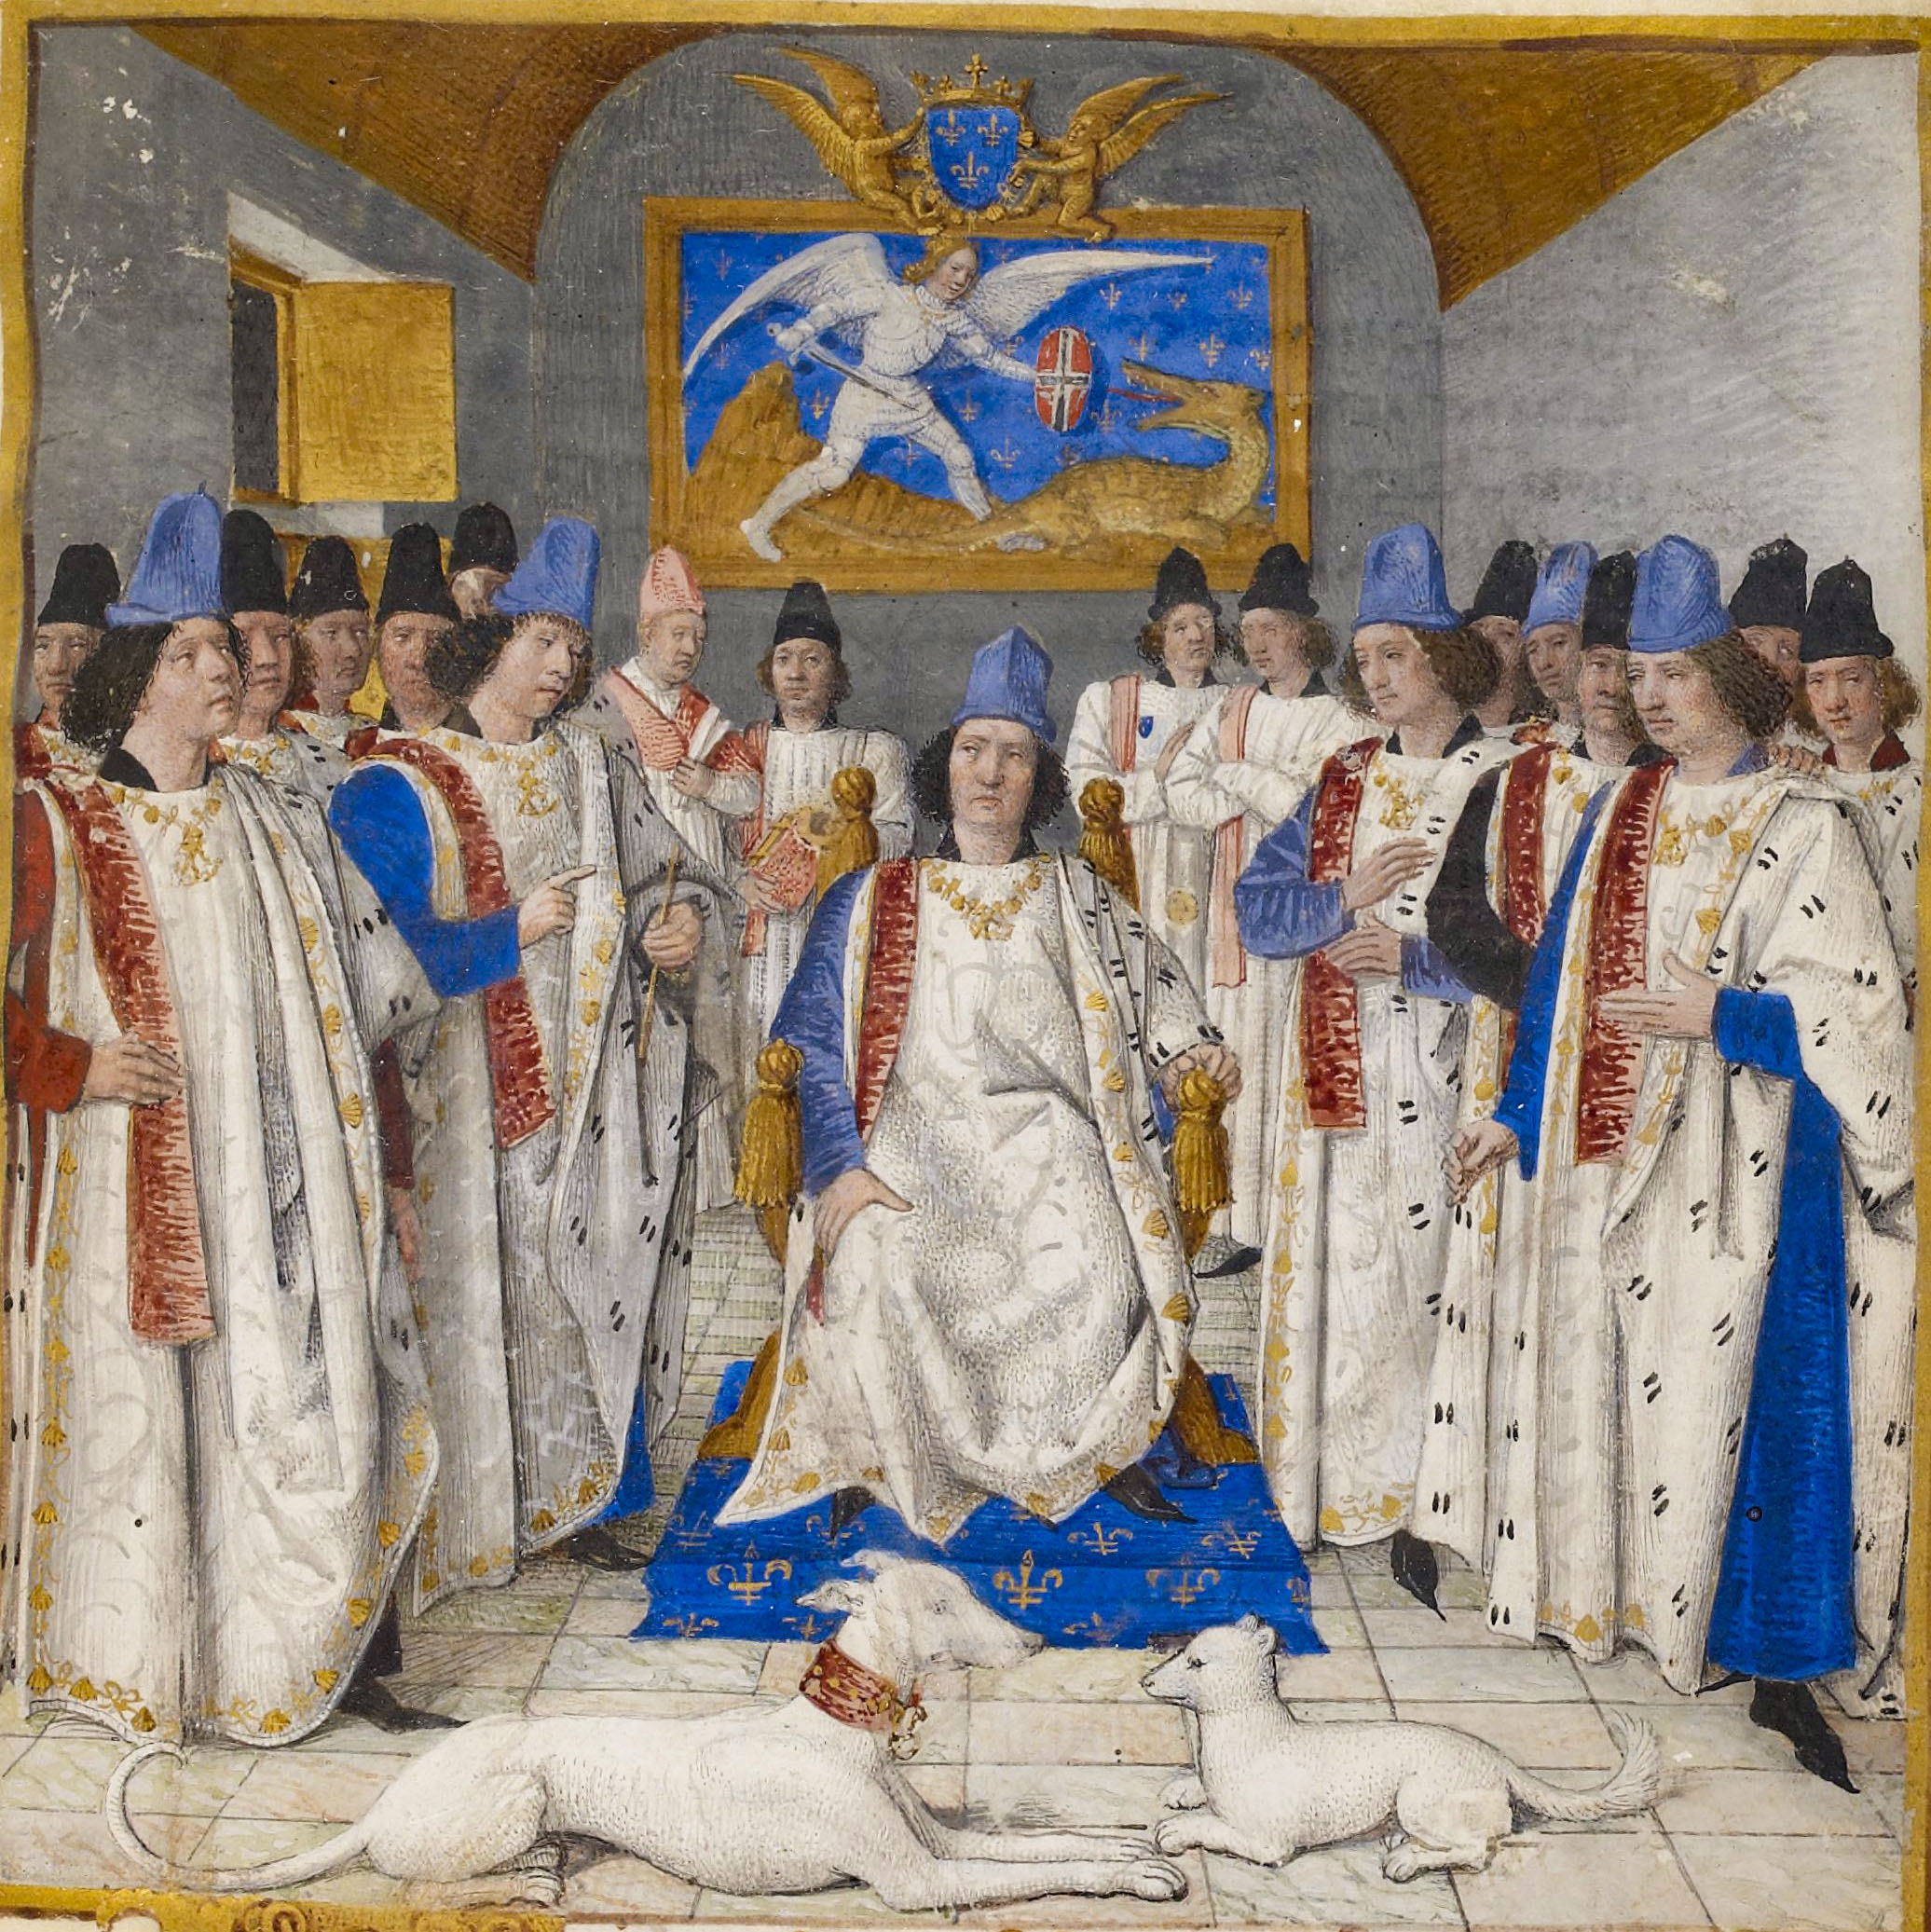 Louis XI in the midst of his knights wearing the mantle, chaperon and collar of the order of Saint-Michel